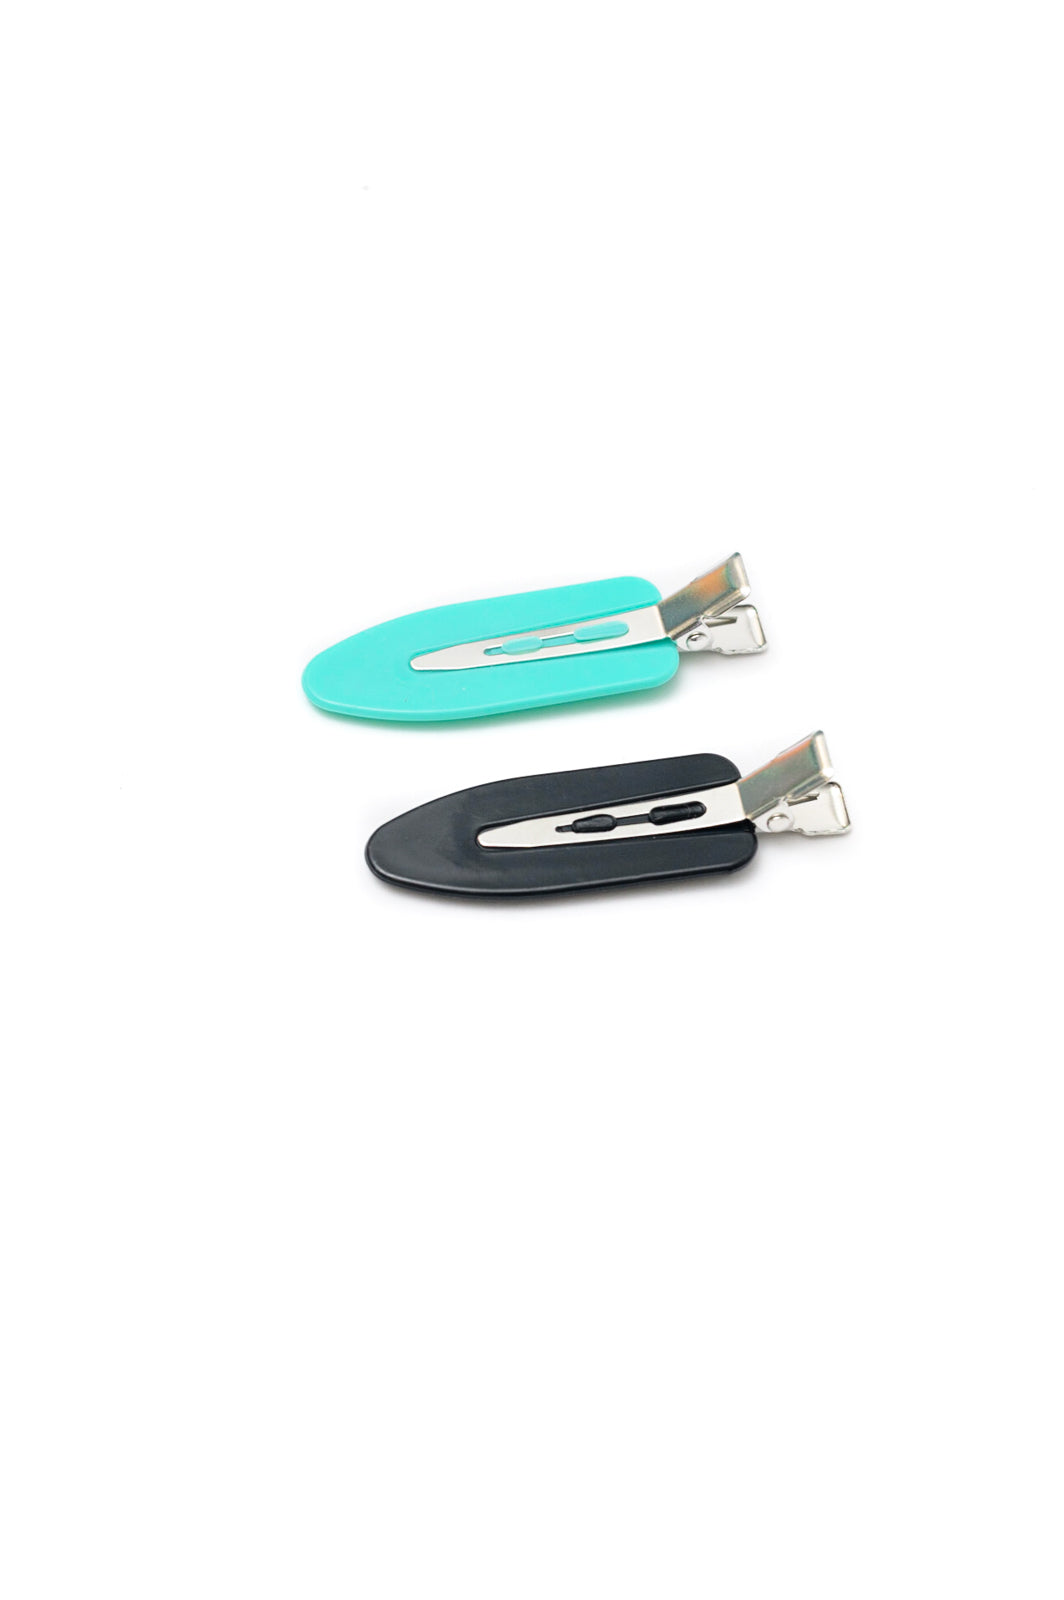 Hair Setting Clips in Teal-Beauty-Krush Kandy, Women's Online Fashion Boutique Located in Phoenix, Arizona (Scottsdale Area)